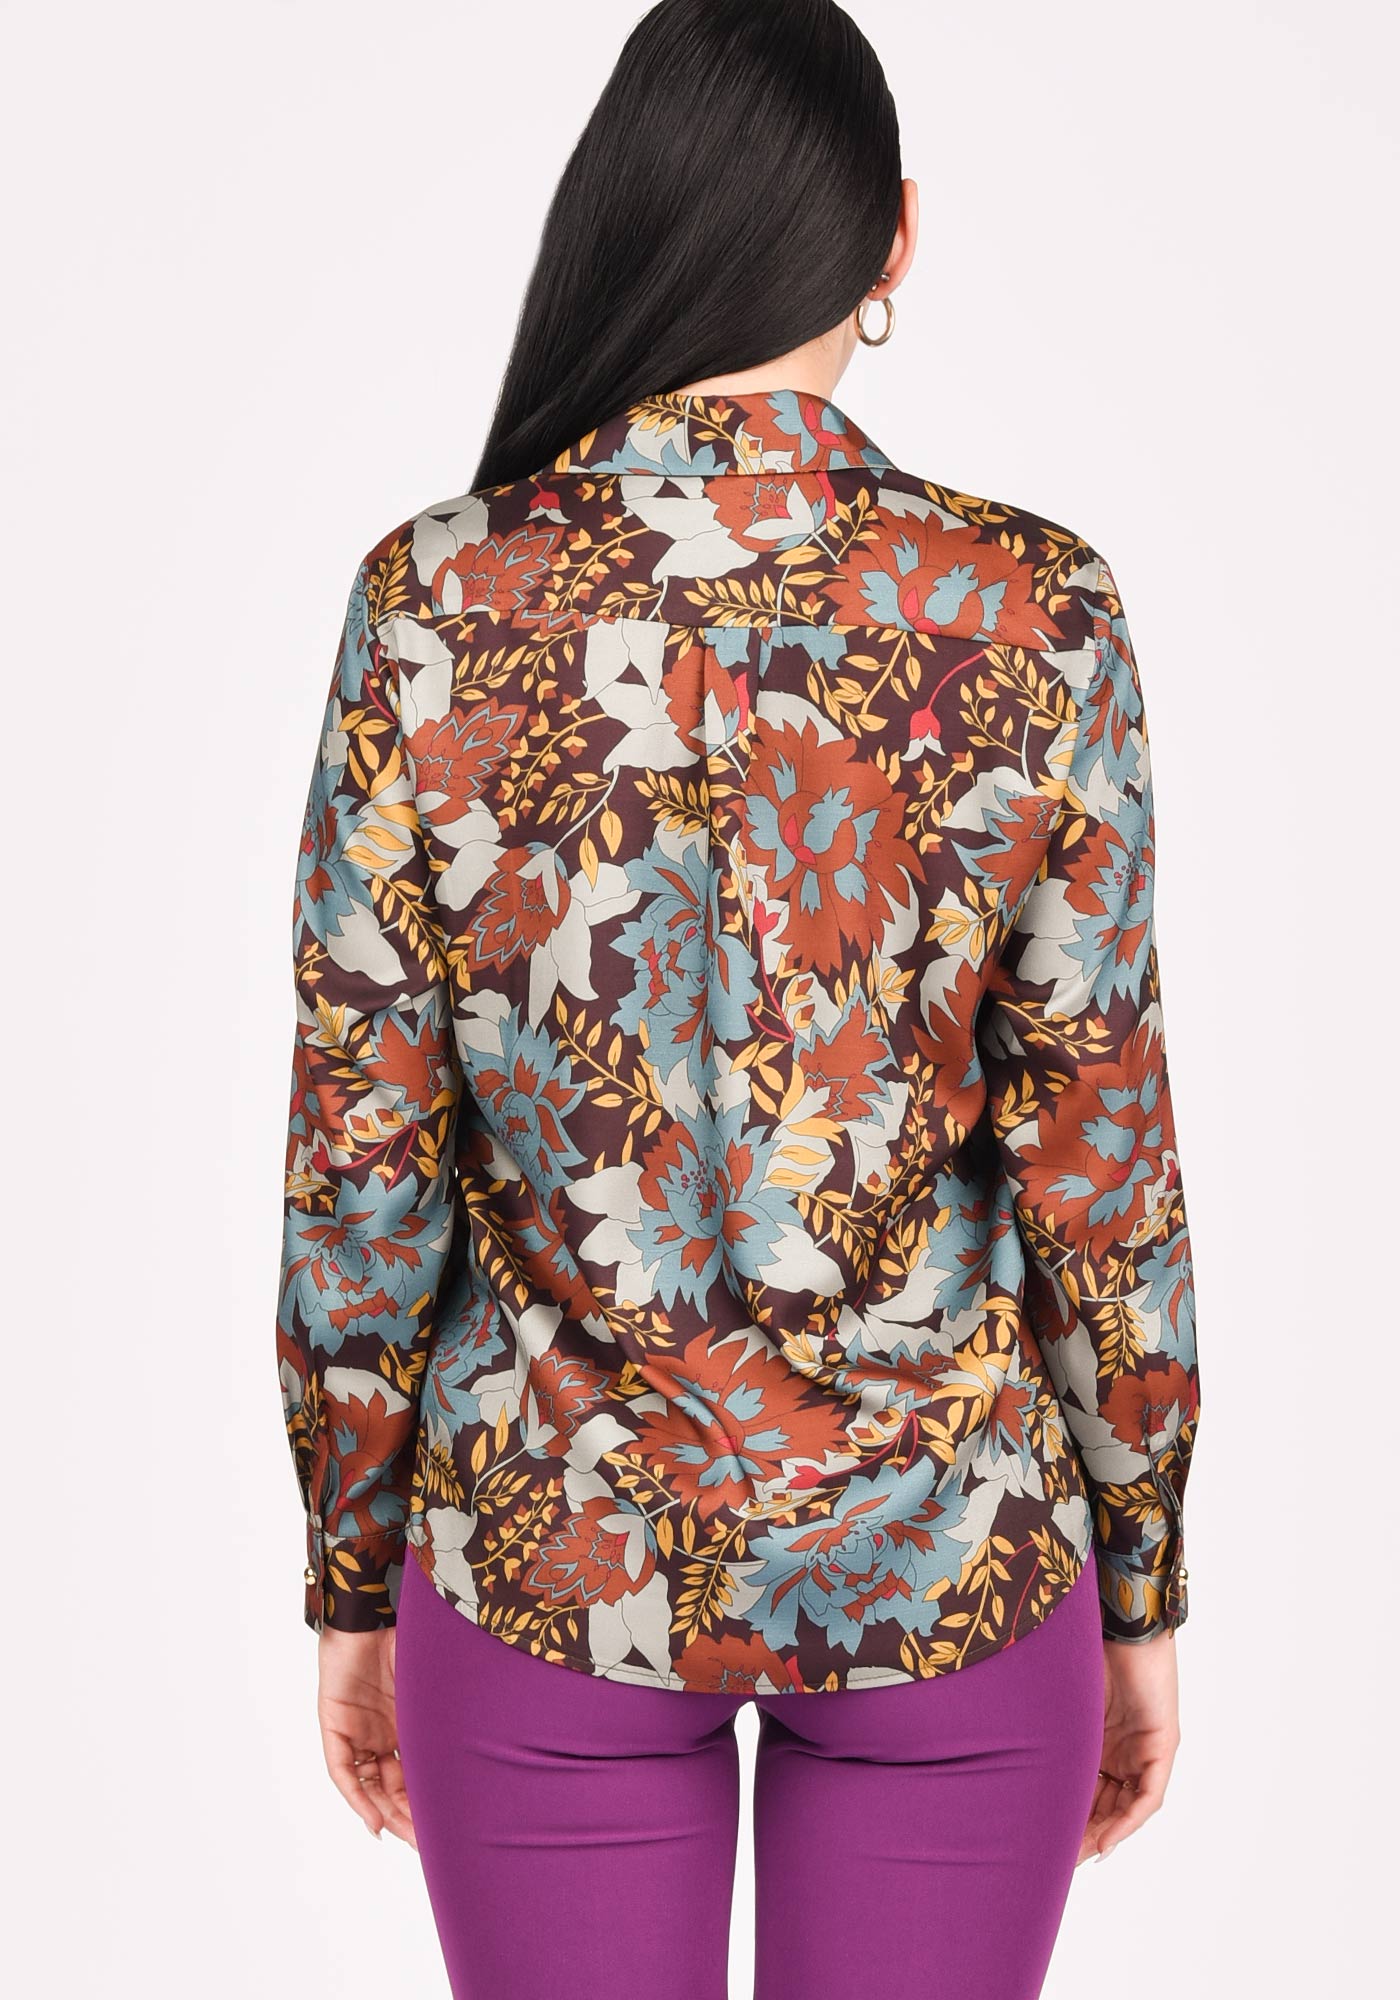 Women's Relaxed Button up Shirt in Floral Satin